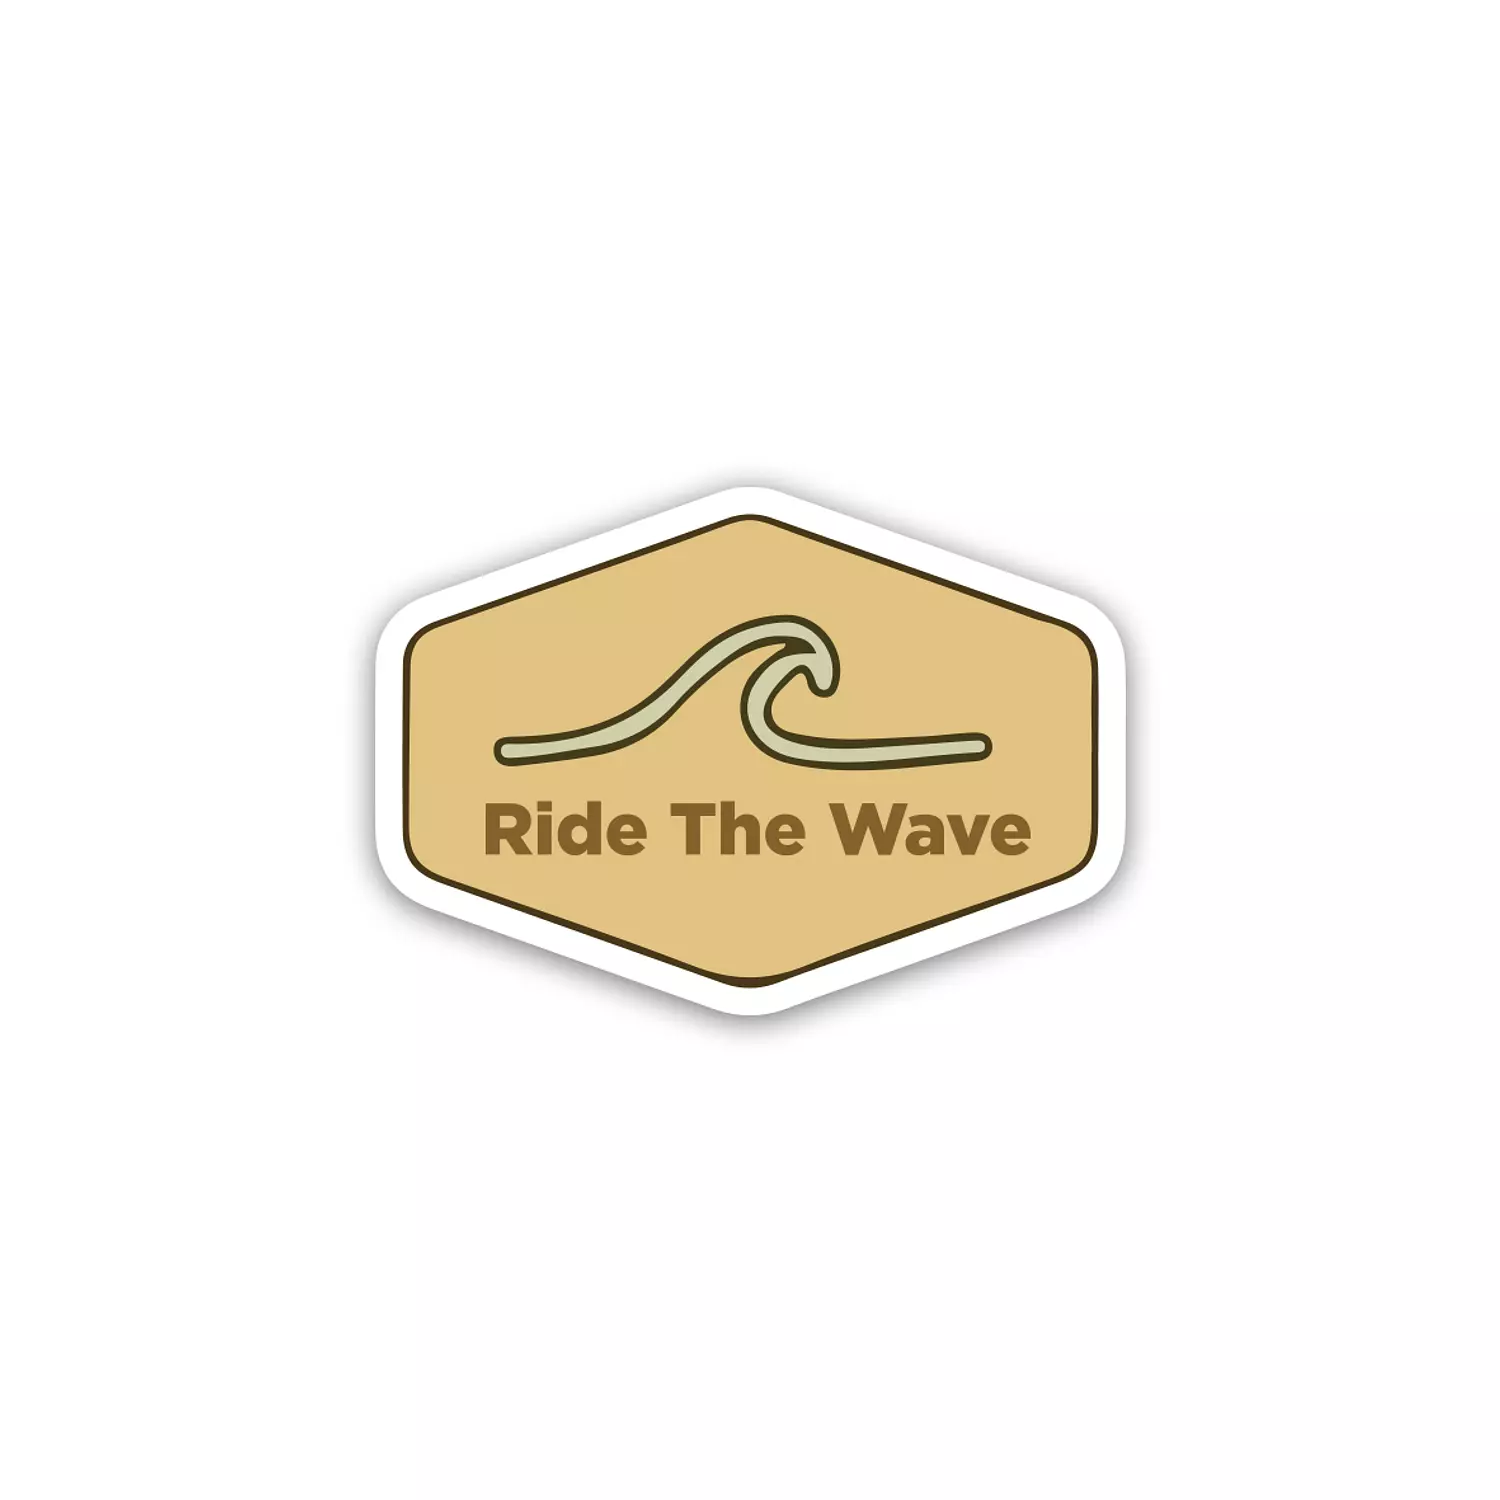 Ride The Wave - Positive Quotes  hover image